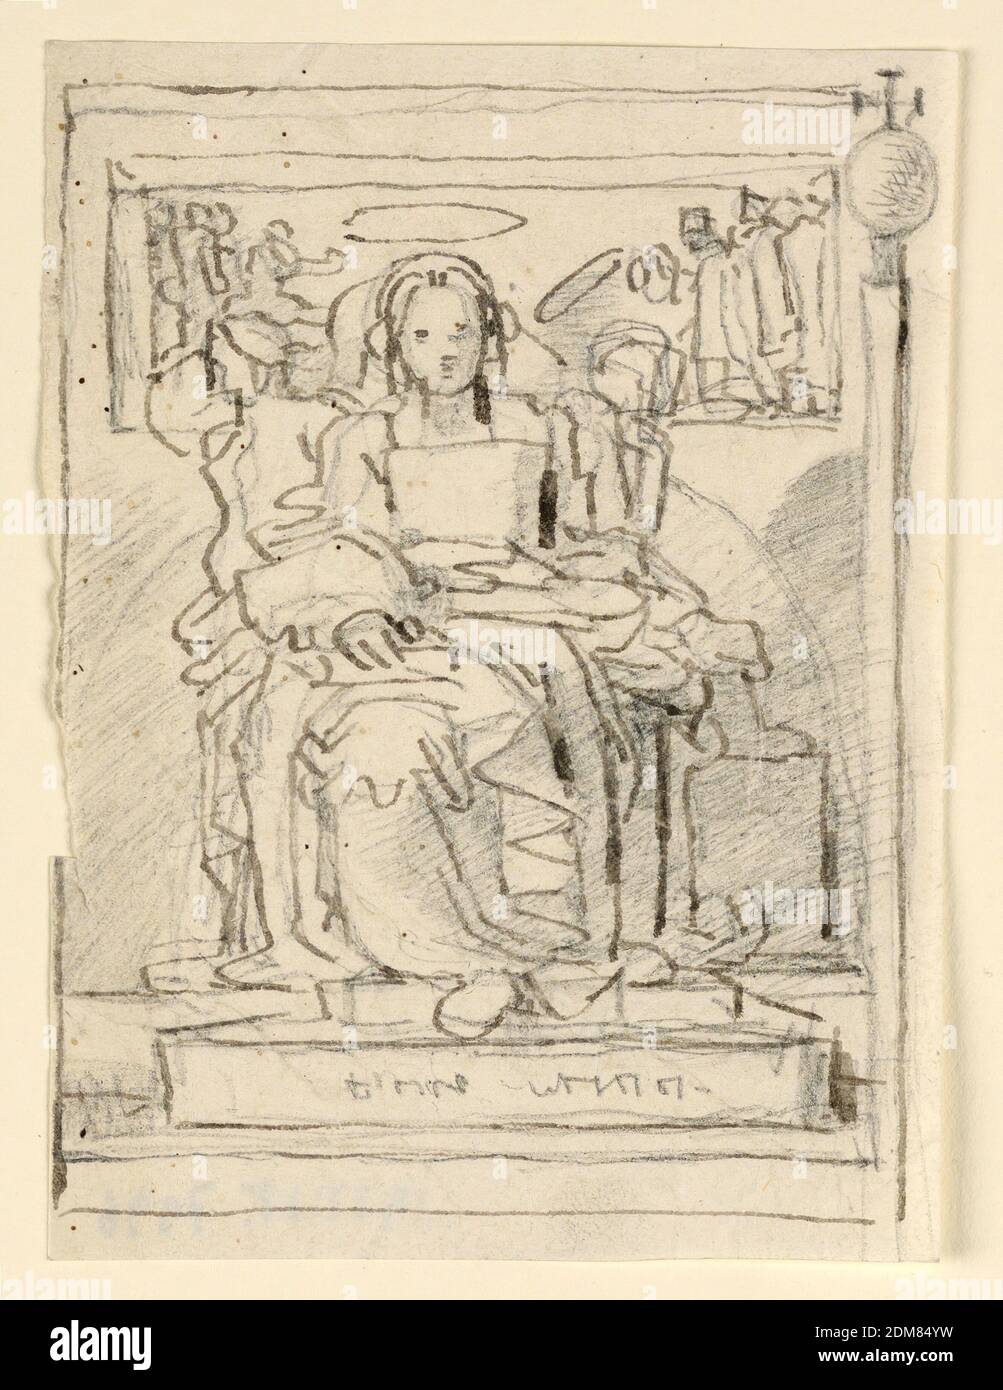 The Virgin and Child Enthroned, Fortunato Duranti, Italian, 1787 - 1863, Graphite, pen and ink on paper, The Virgin and Child enthroned with figures above., Rome, Italy, 1820–1850, Drawing Stock Photo